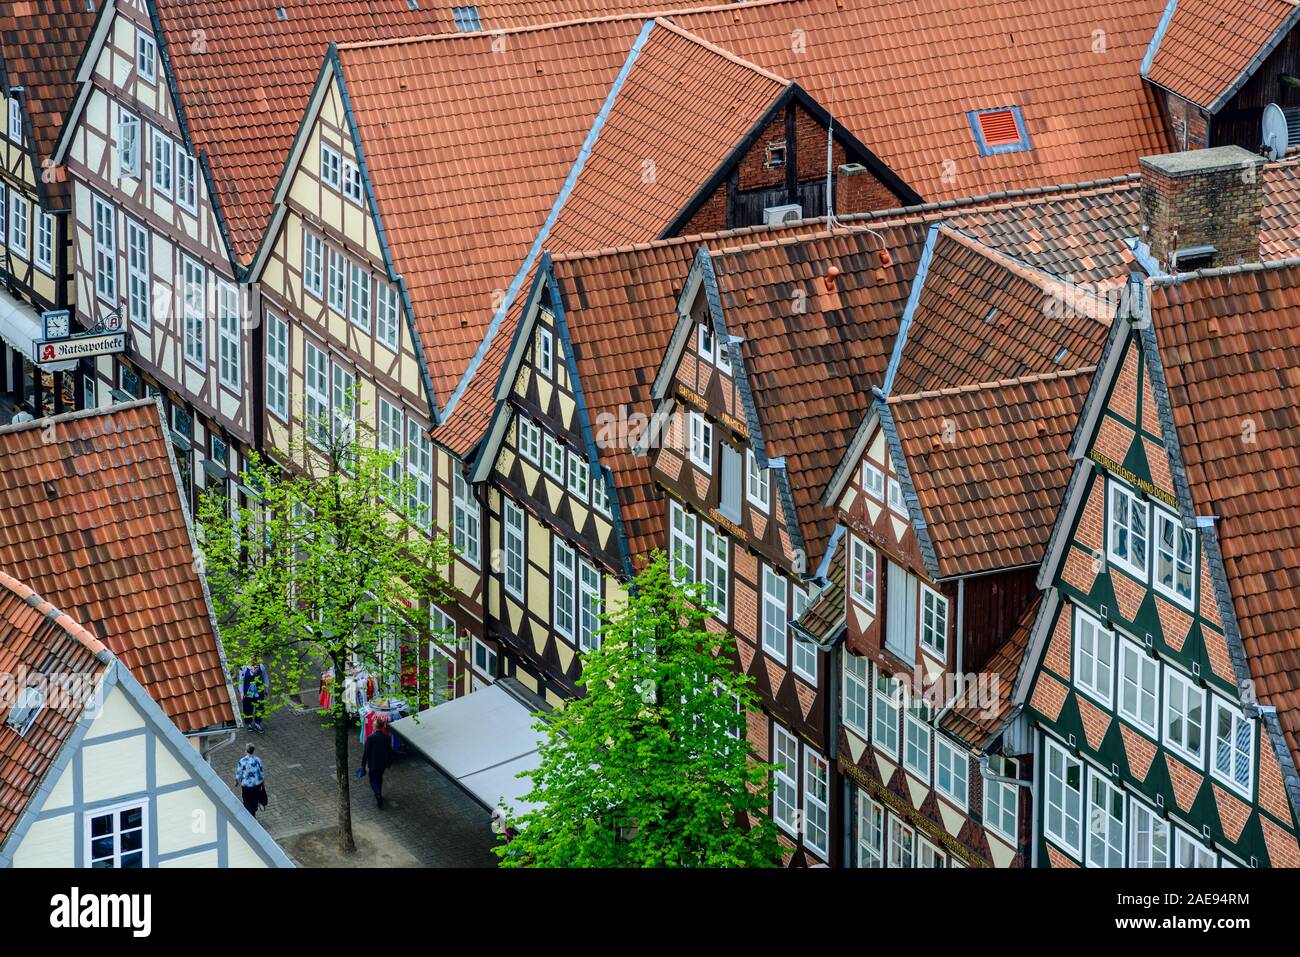 View over the rooftops of the medieval old town of Celle, from the tower of the town church, Stadtkirche, Celle, Lower Saxony, Germany Stock Photo